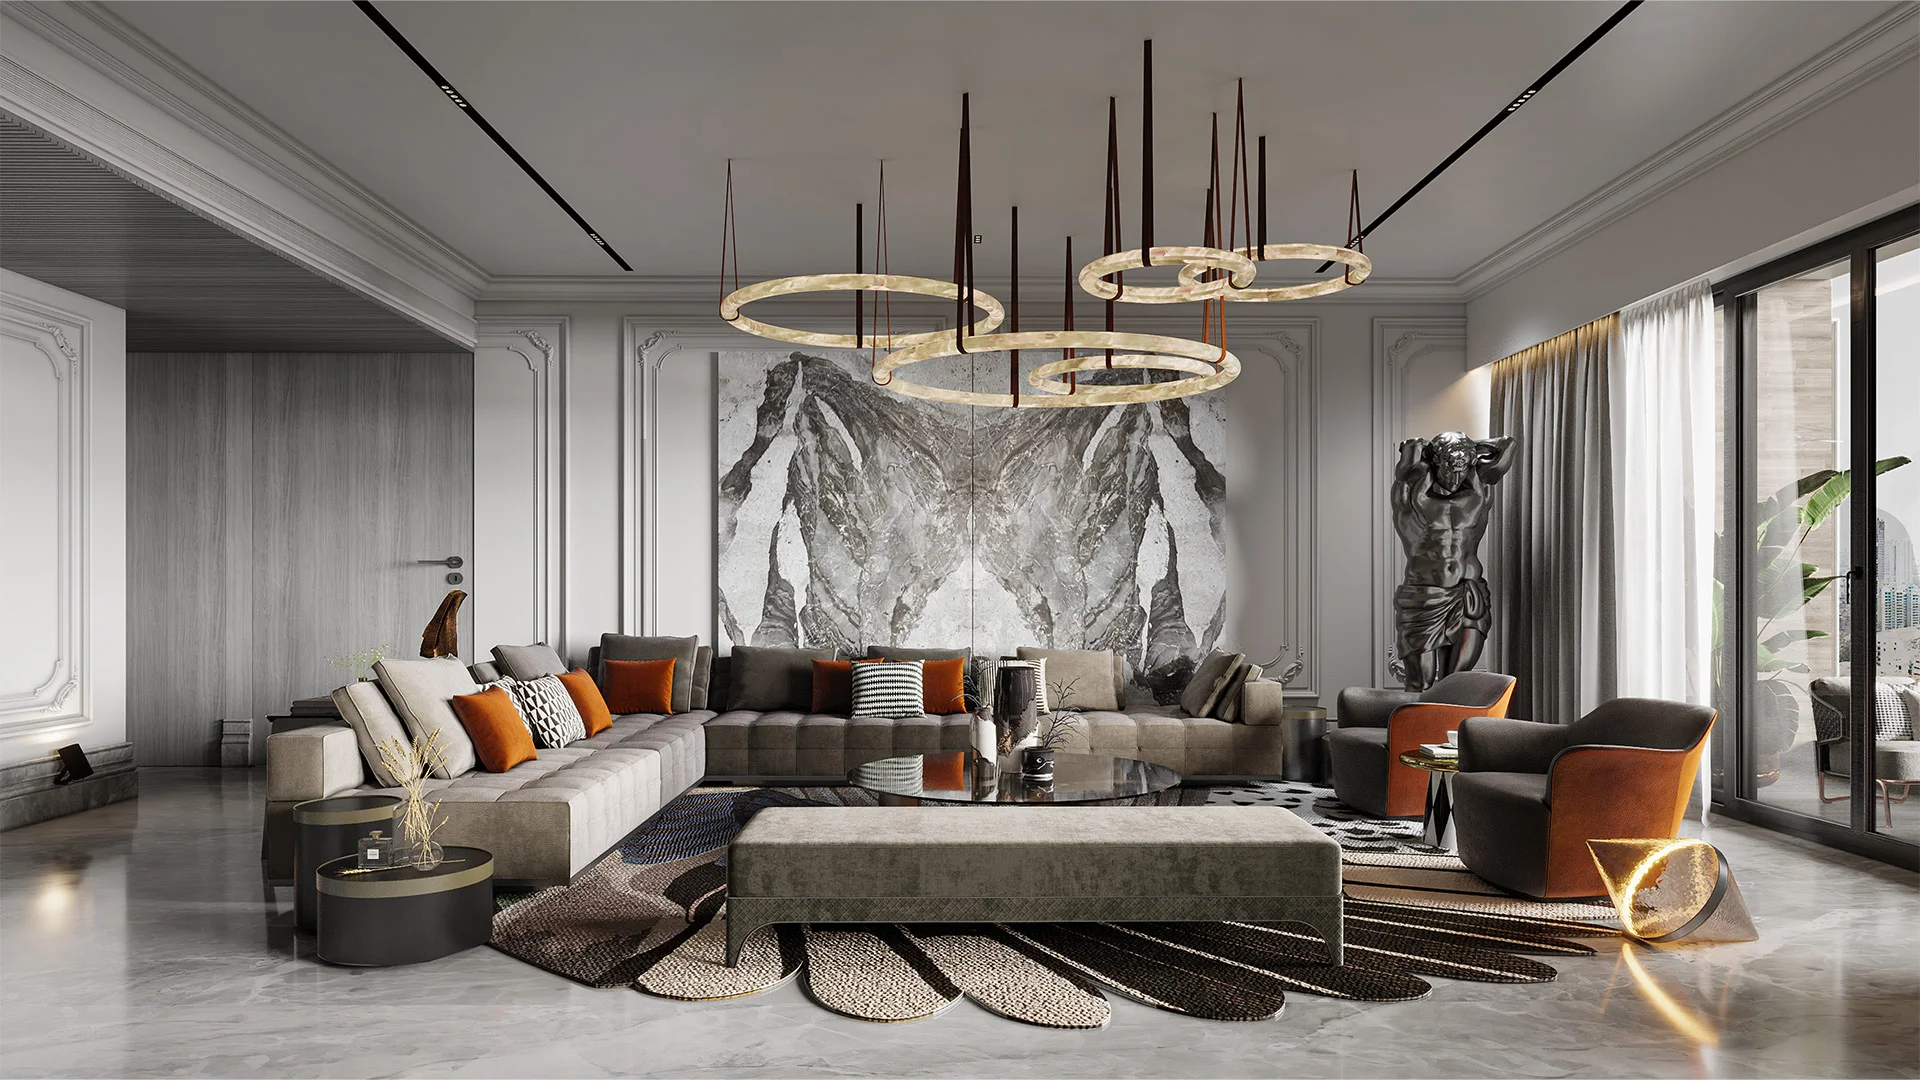 Top 9 Luxury Interior Design Ideas for a HighEnd Space